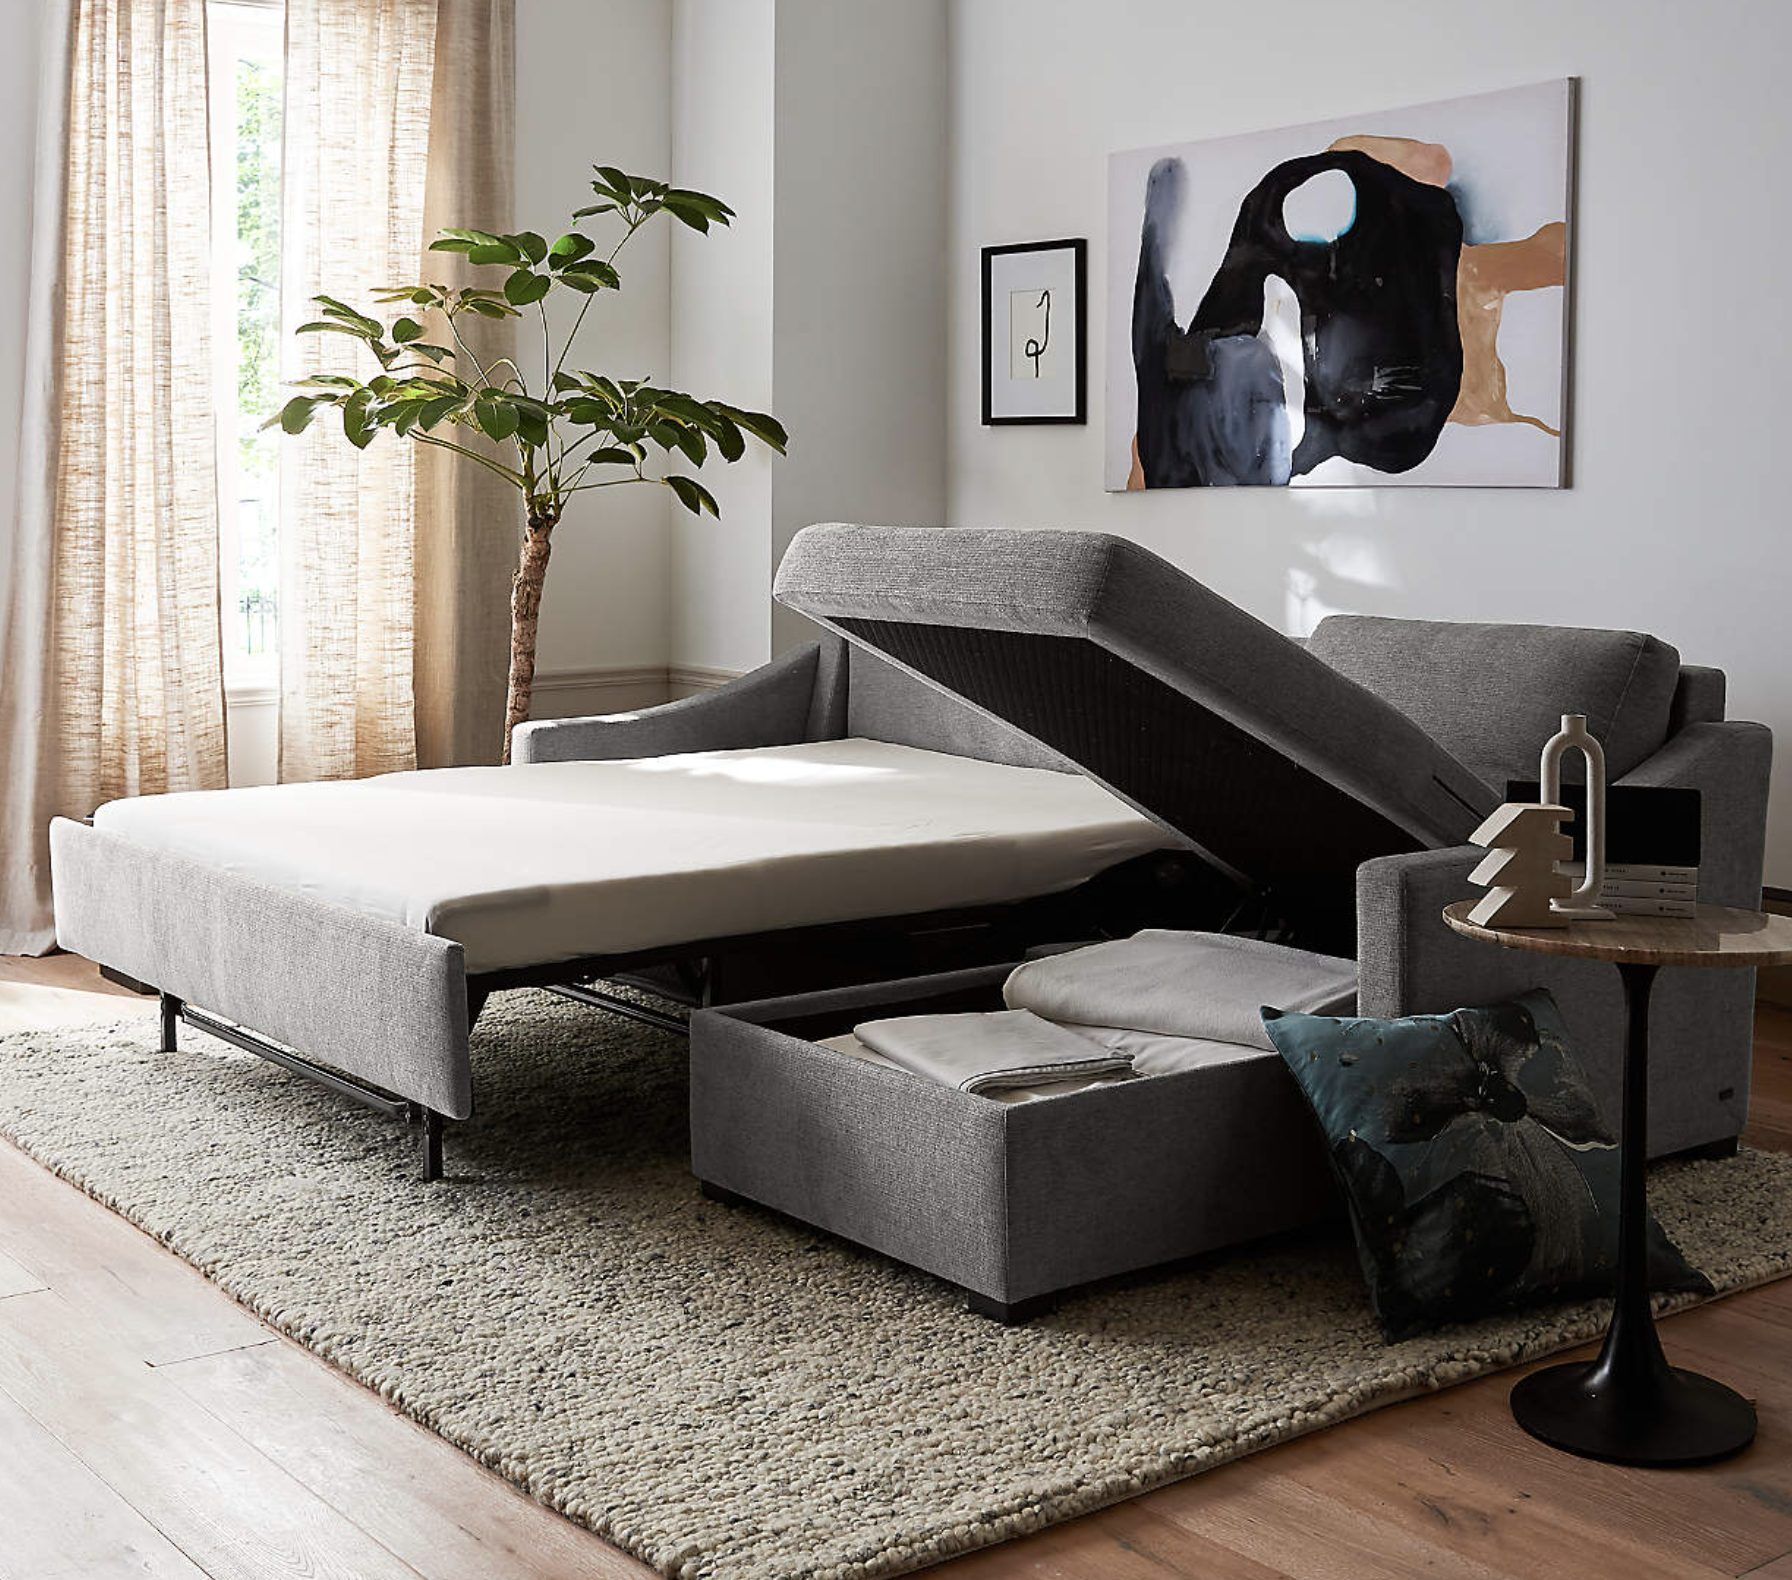 Pull Out Couch for Wider Space and
Comfortable Sleep